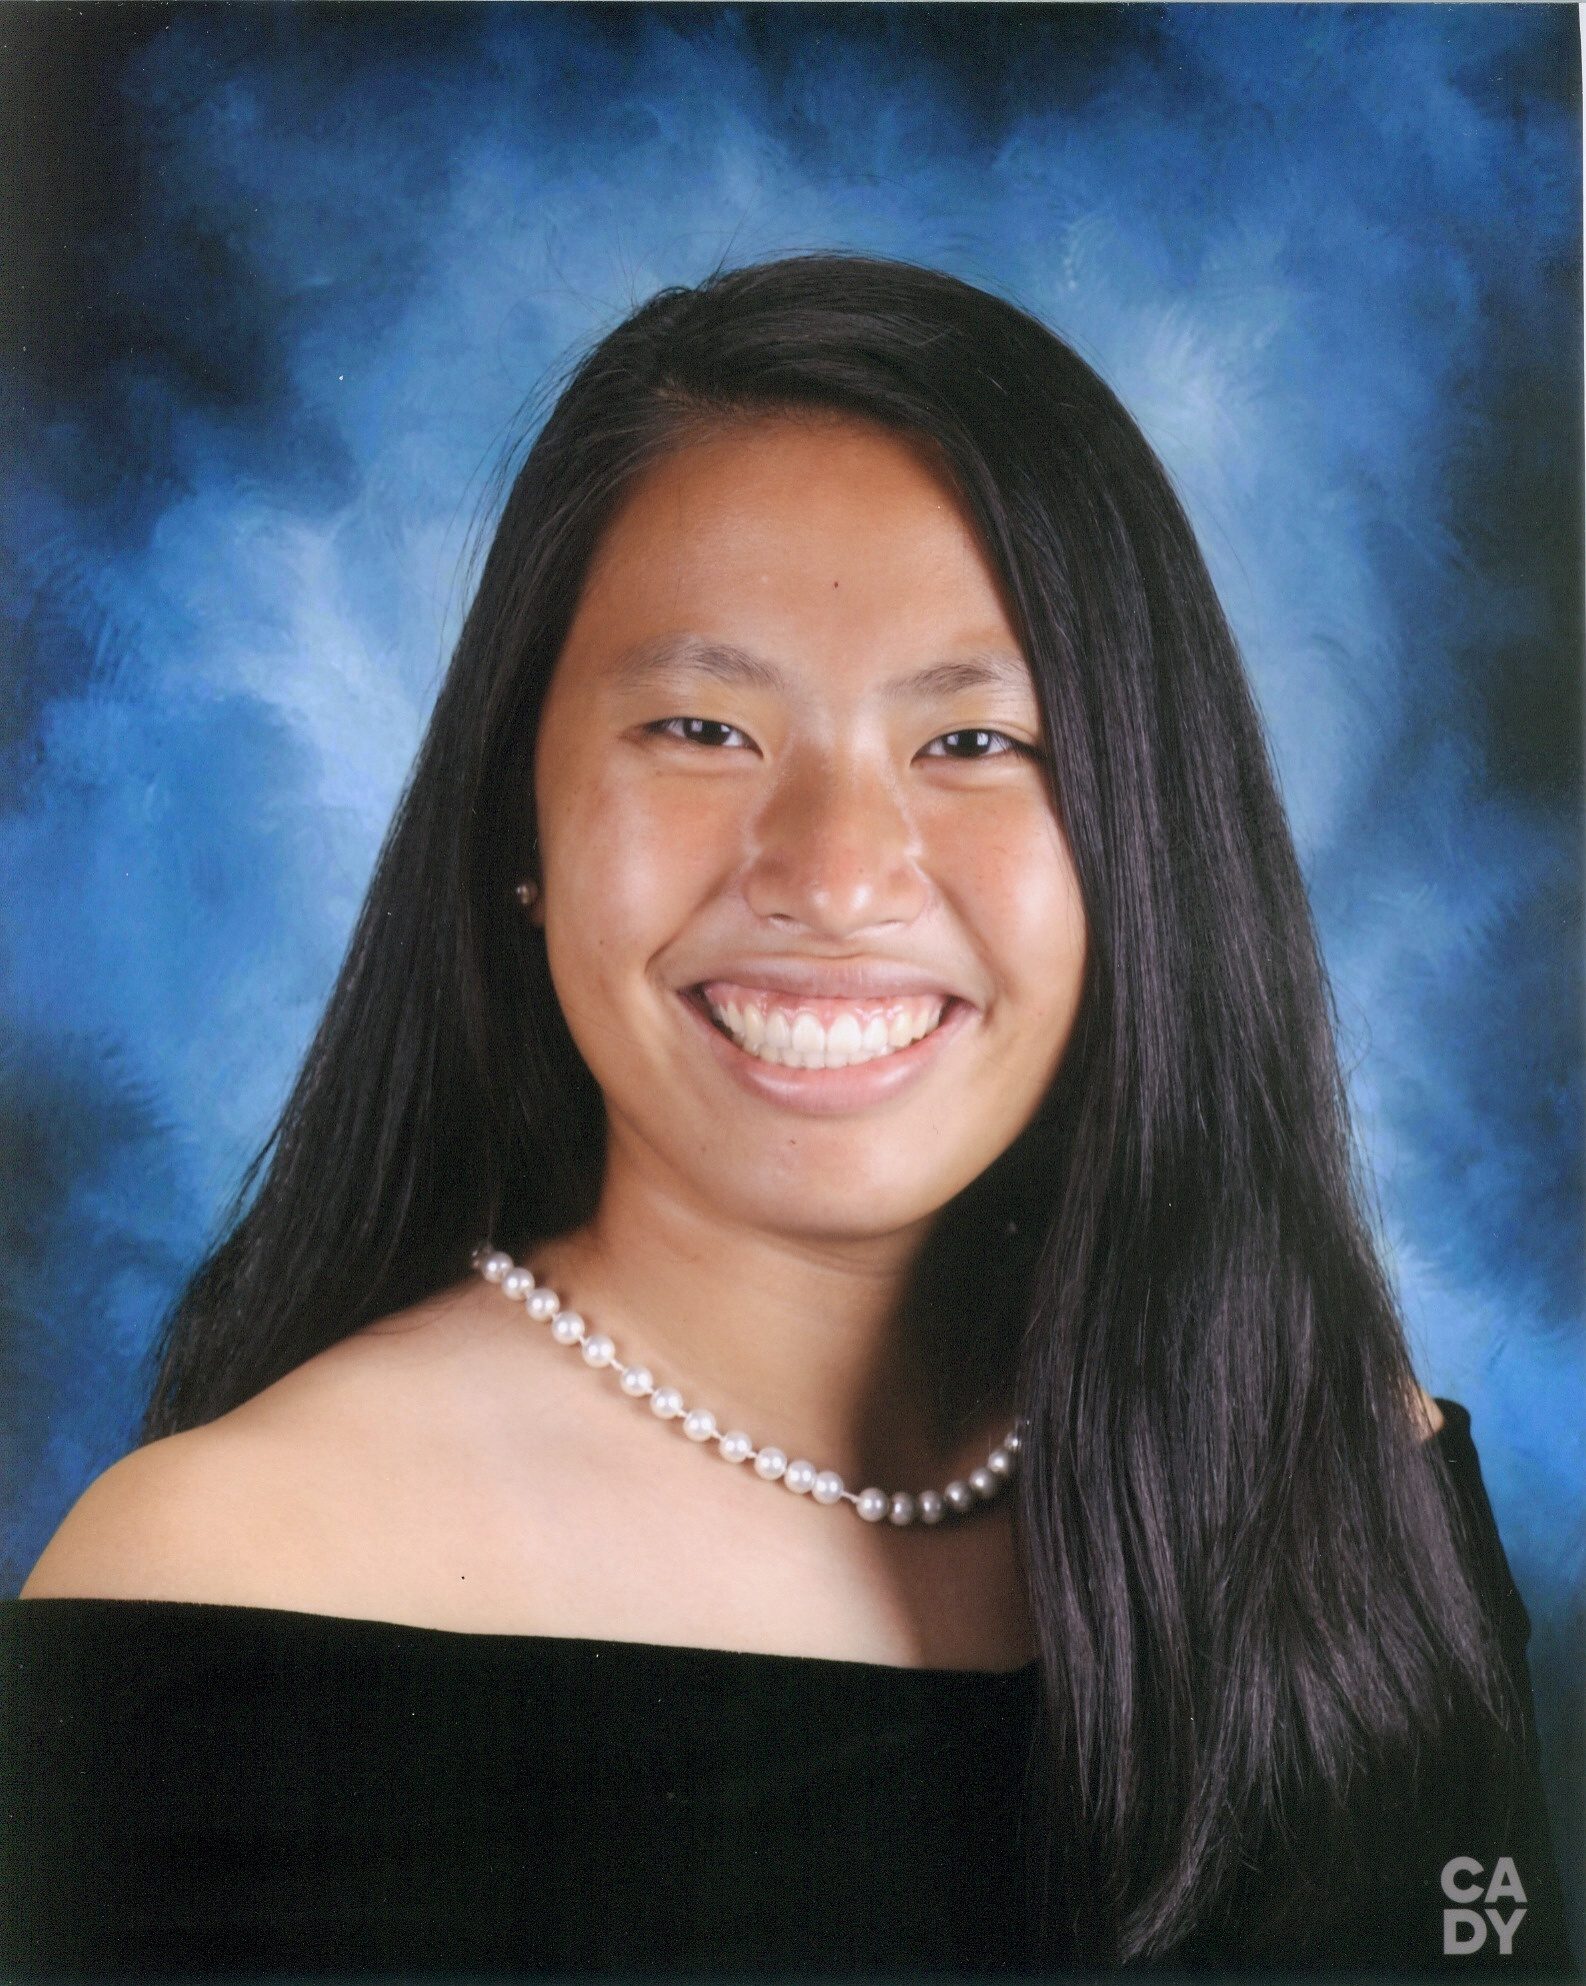 school photo of smiling girl wearing black off the shoulder top and pearl necklace against blue background